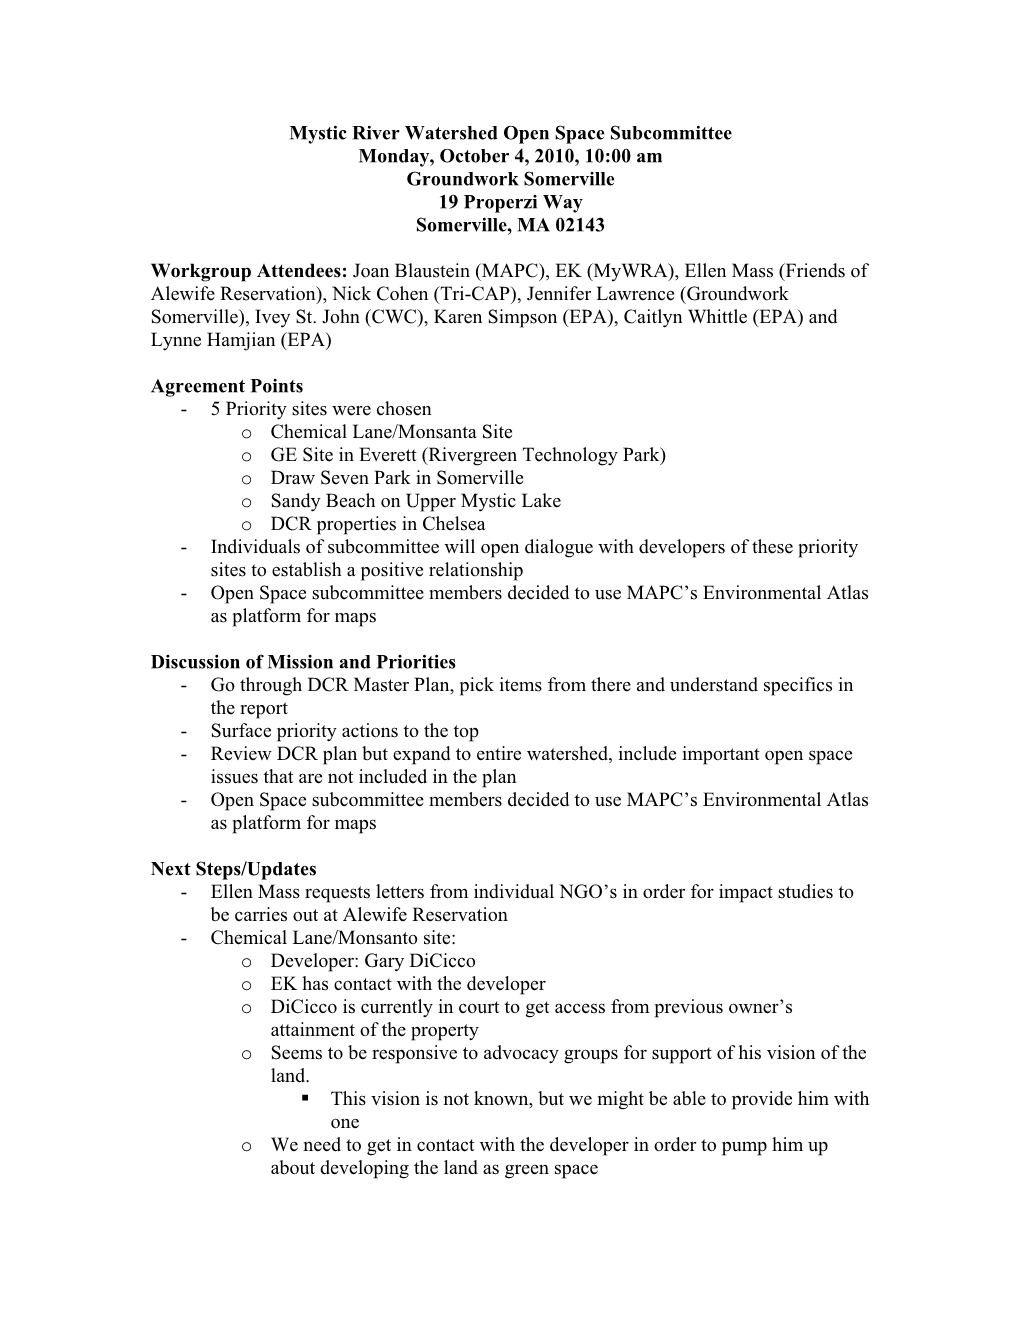 October 4, 2010 | Meeting Notes | Mystic River Watershed Open Space Subcommittee